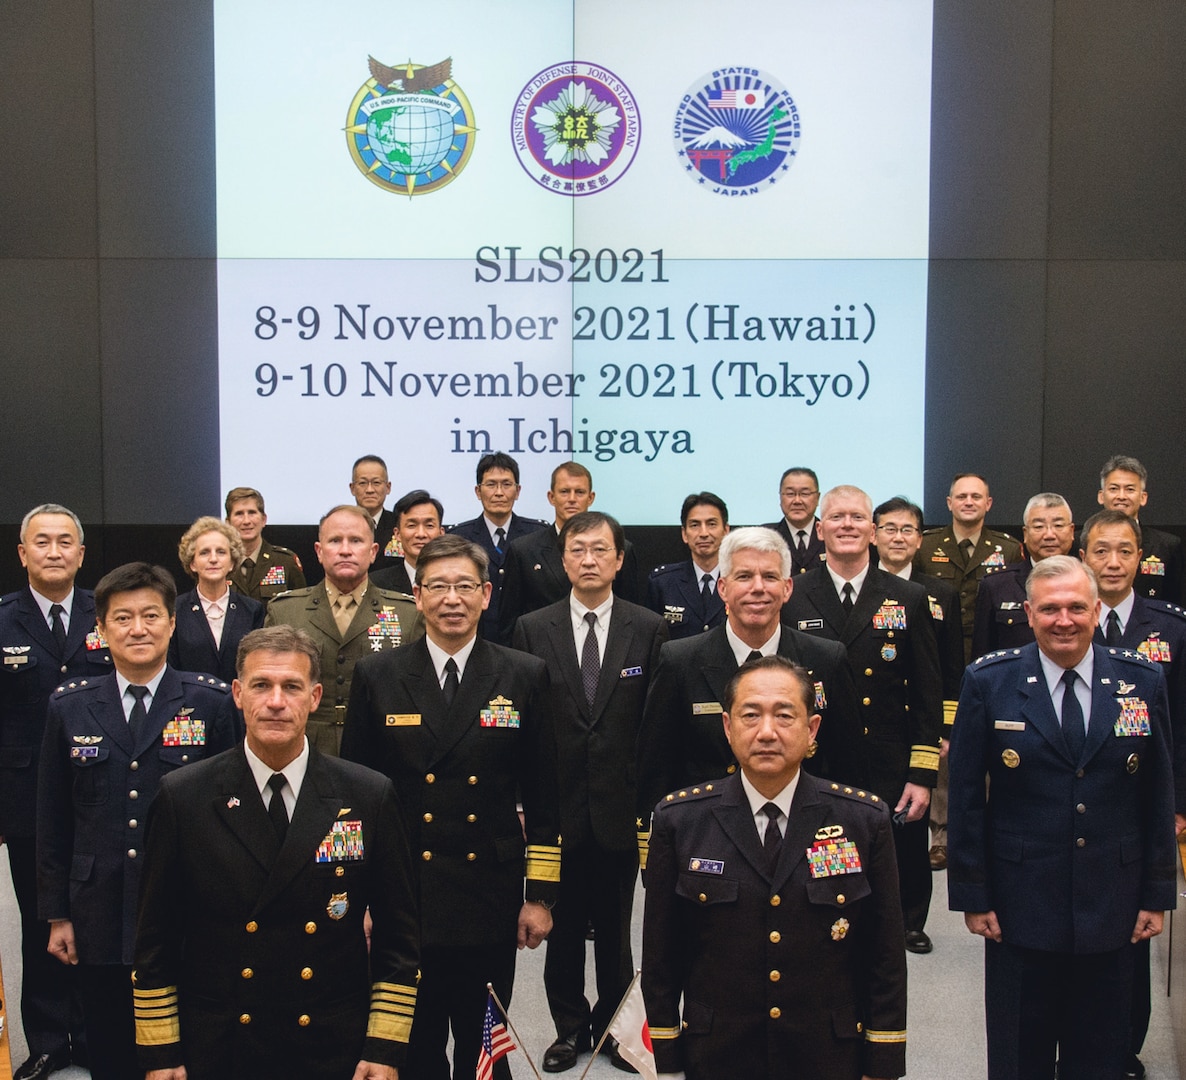 Major participants of the 11th Joint Senior Leaders Seminar, pose for a photo Nov. 10, 2021, at Tokyo, Japan. (Photo courtesy of Japan Joint Staff Public Affairs)